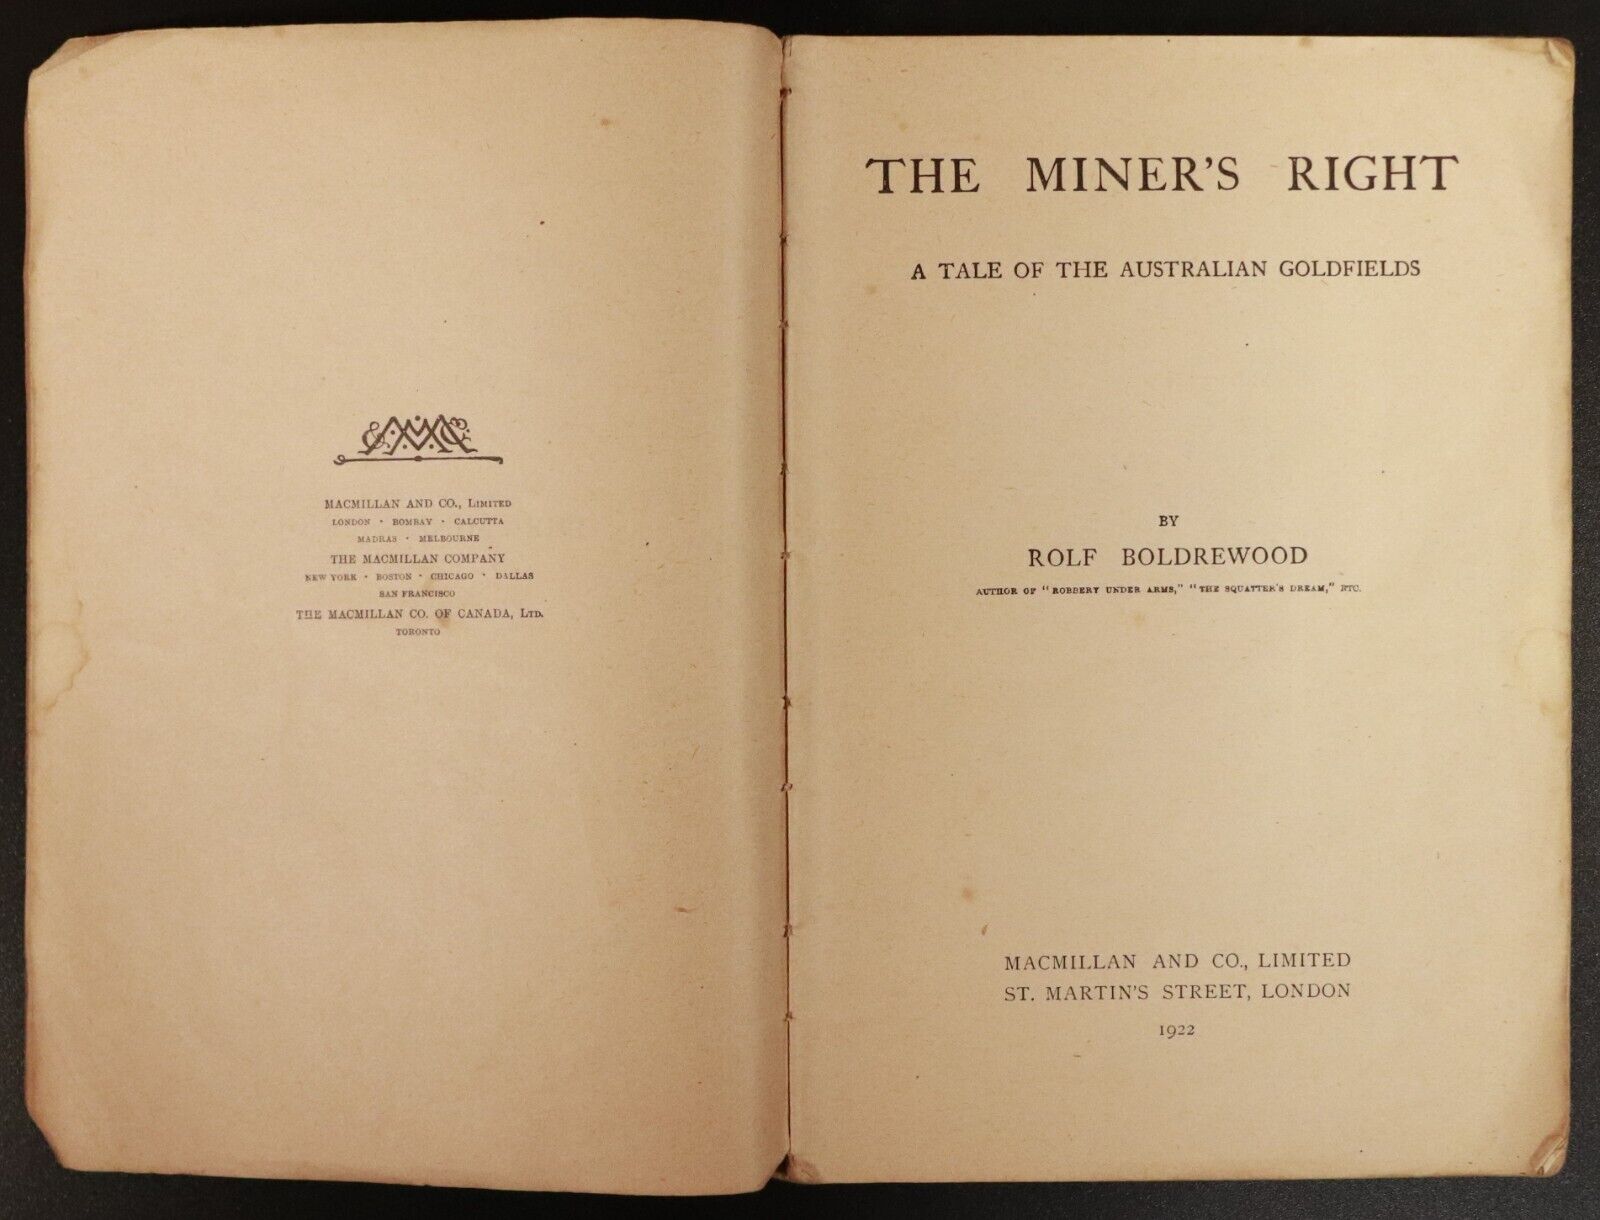 1922 The Miner's Right by Rolf Boldrewood Antique Australian Goldfields Book - 0